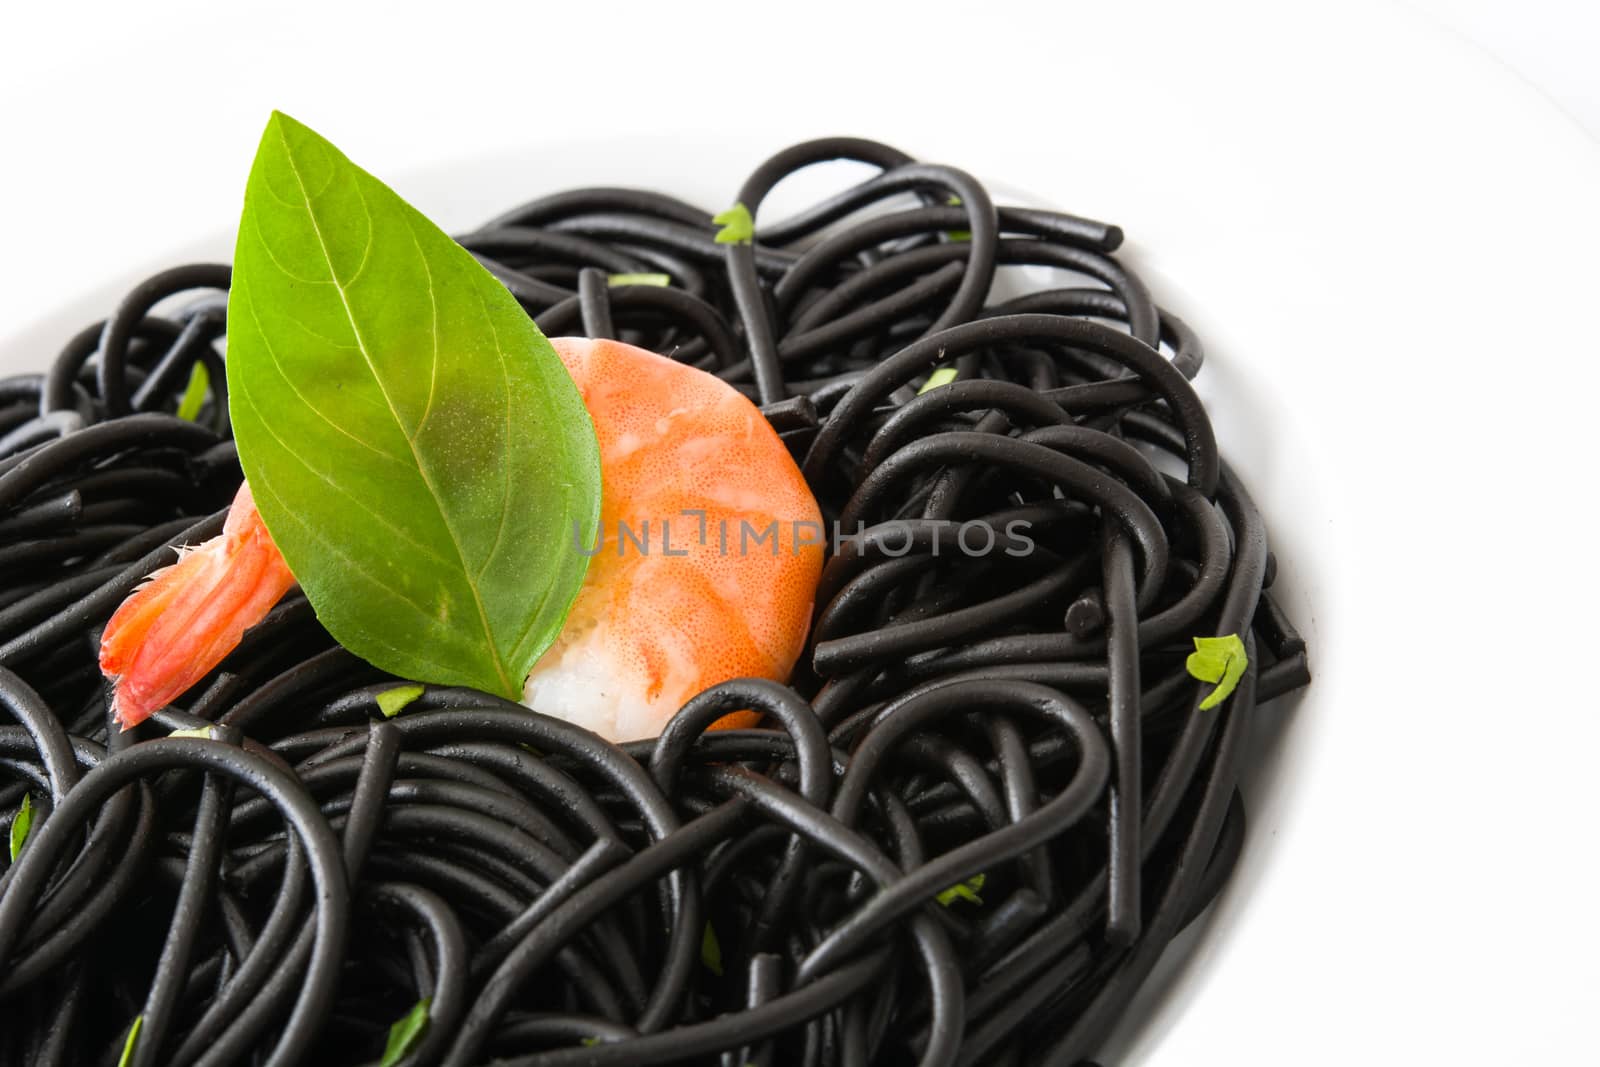 Black spaghetti with prawns and basil isolated on white background by chandlervid85